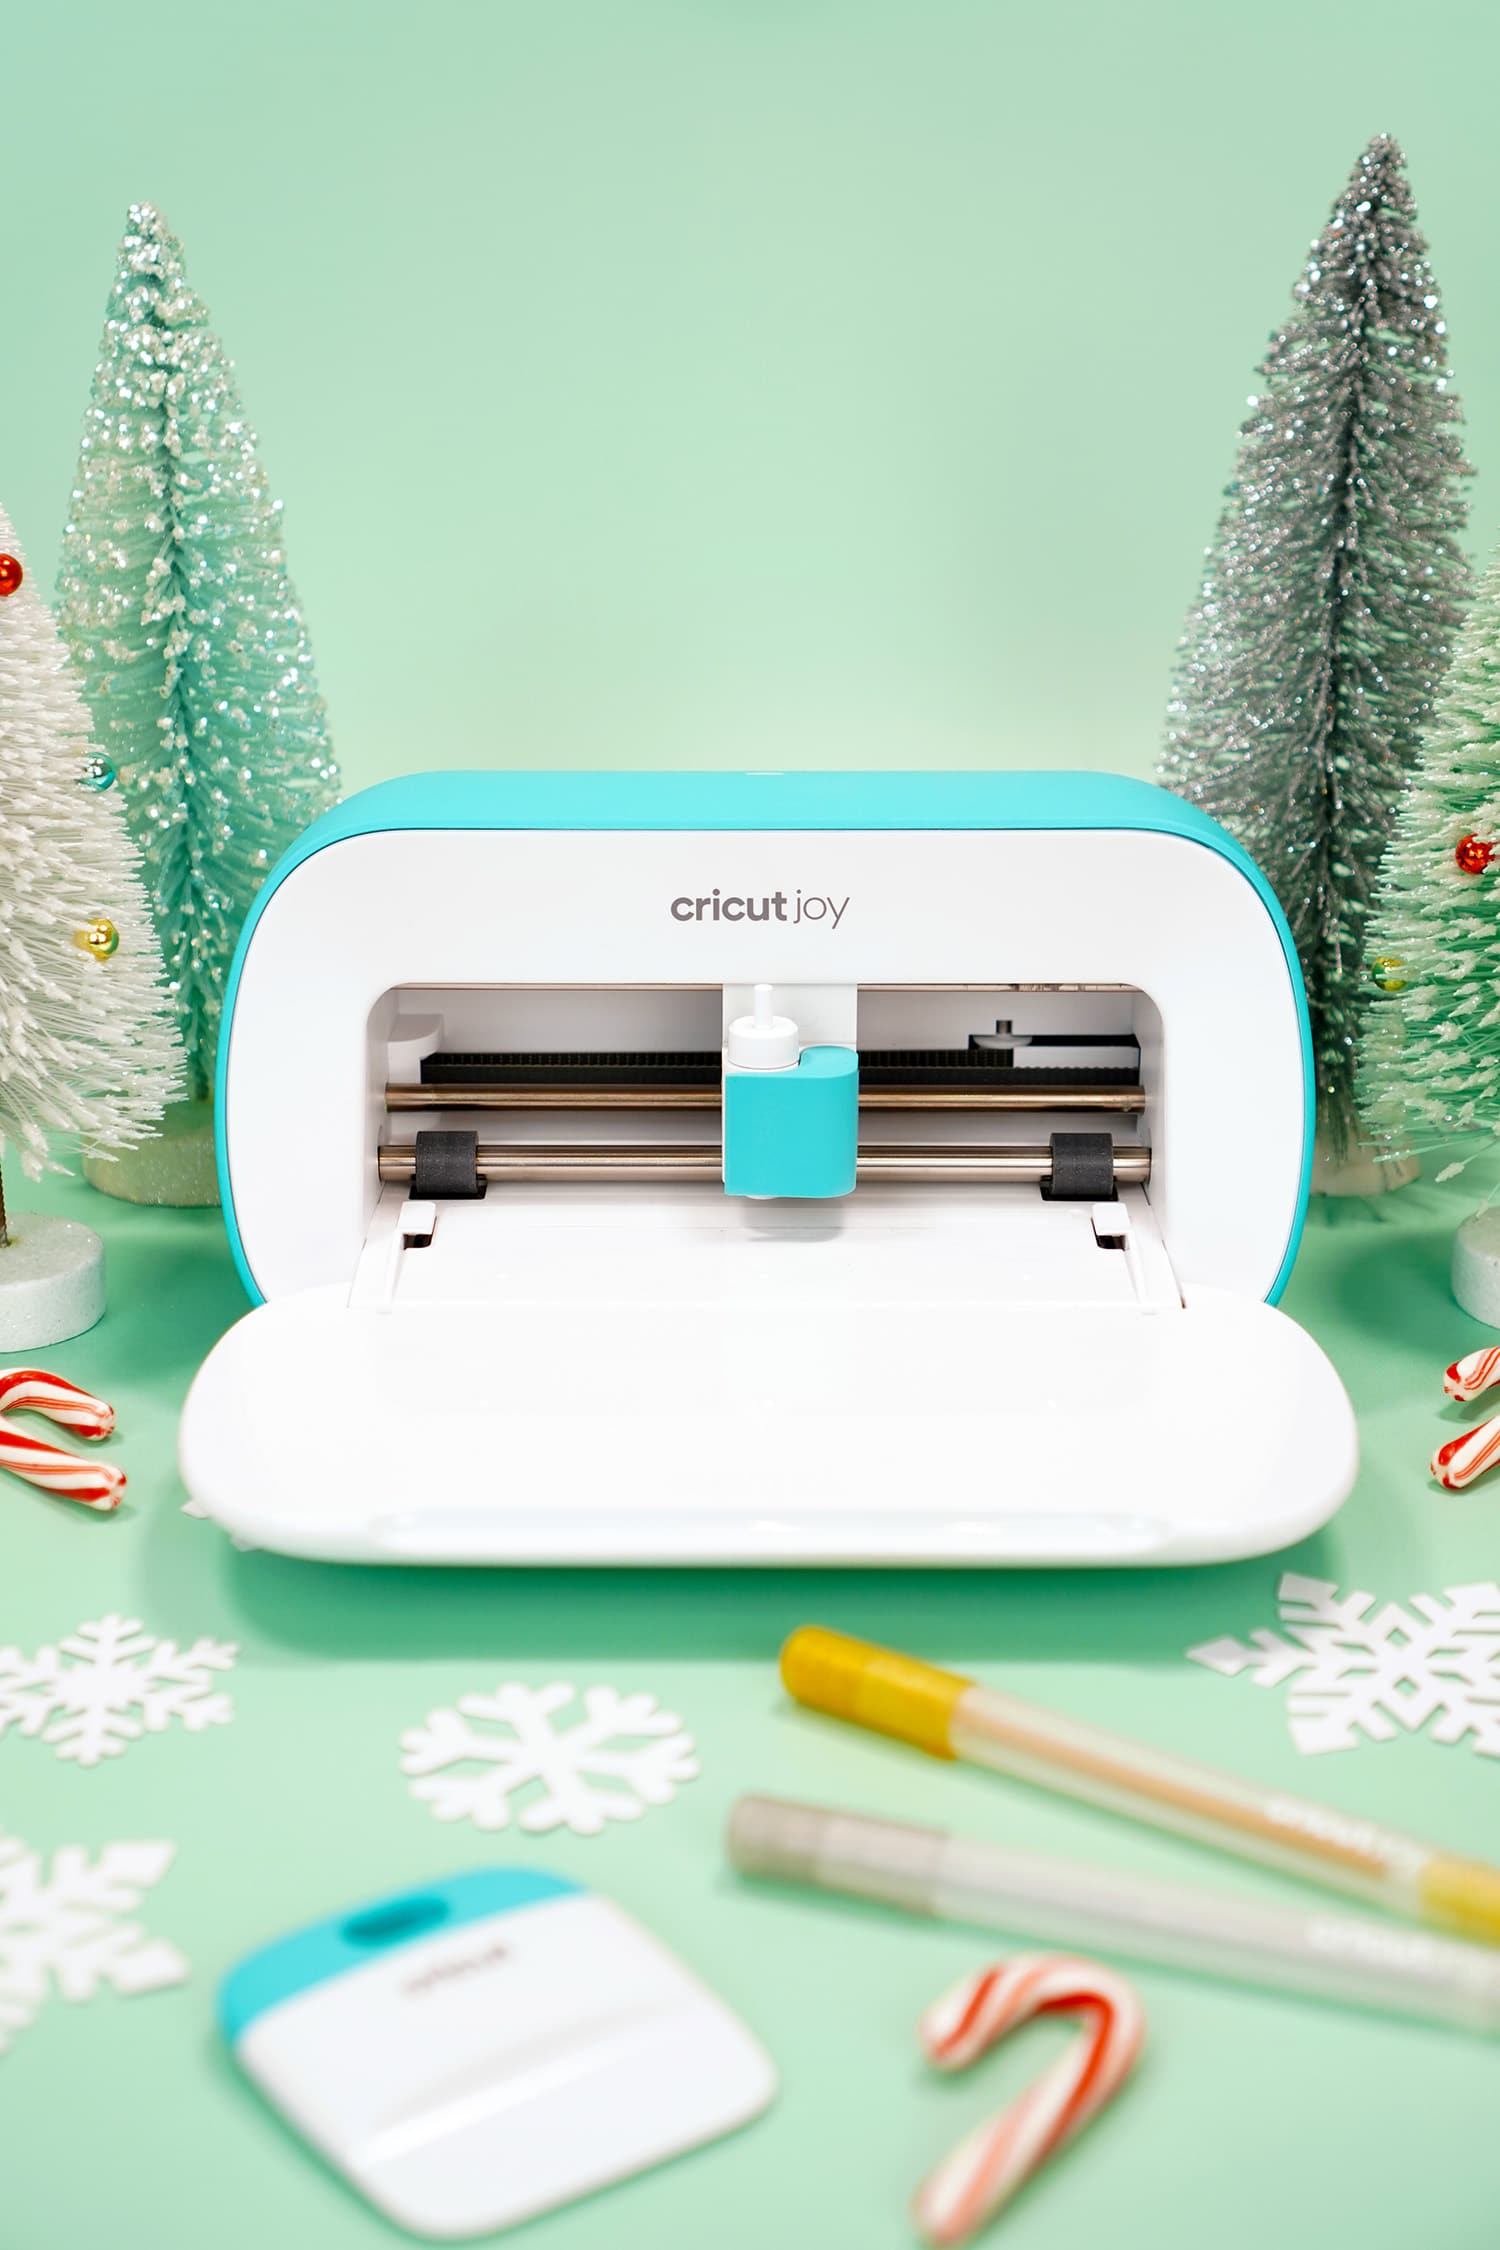 Cricut Joy machine surrounded by Cricut tools, paper snowflakes, and candy canes on mint green background